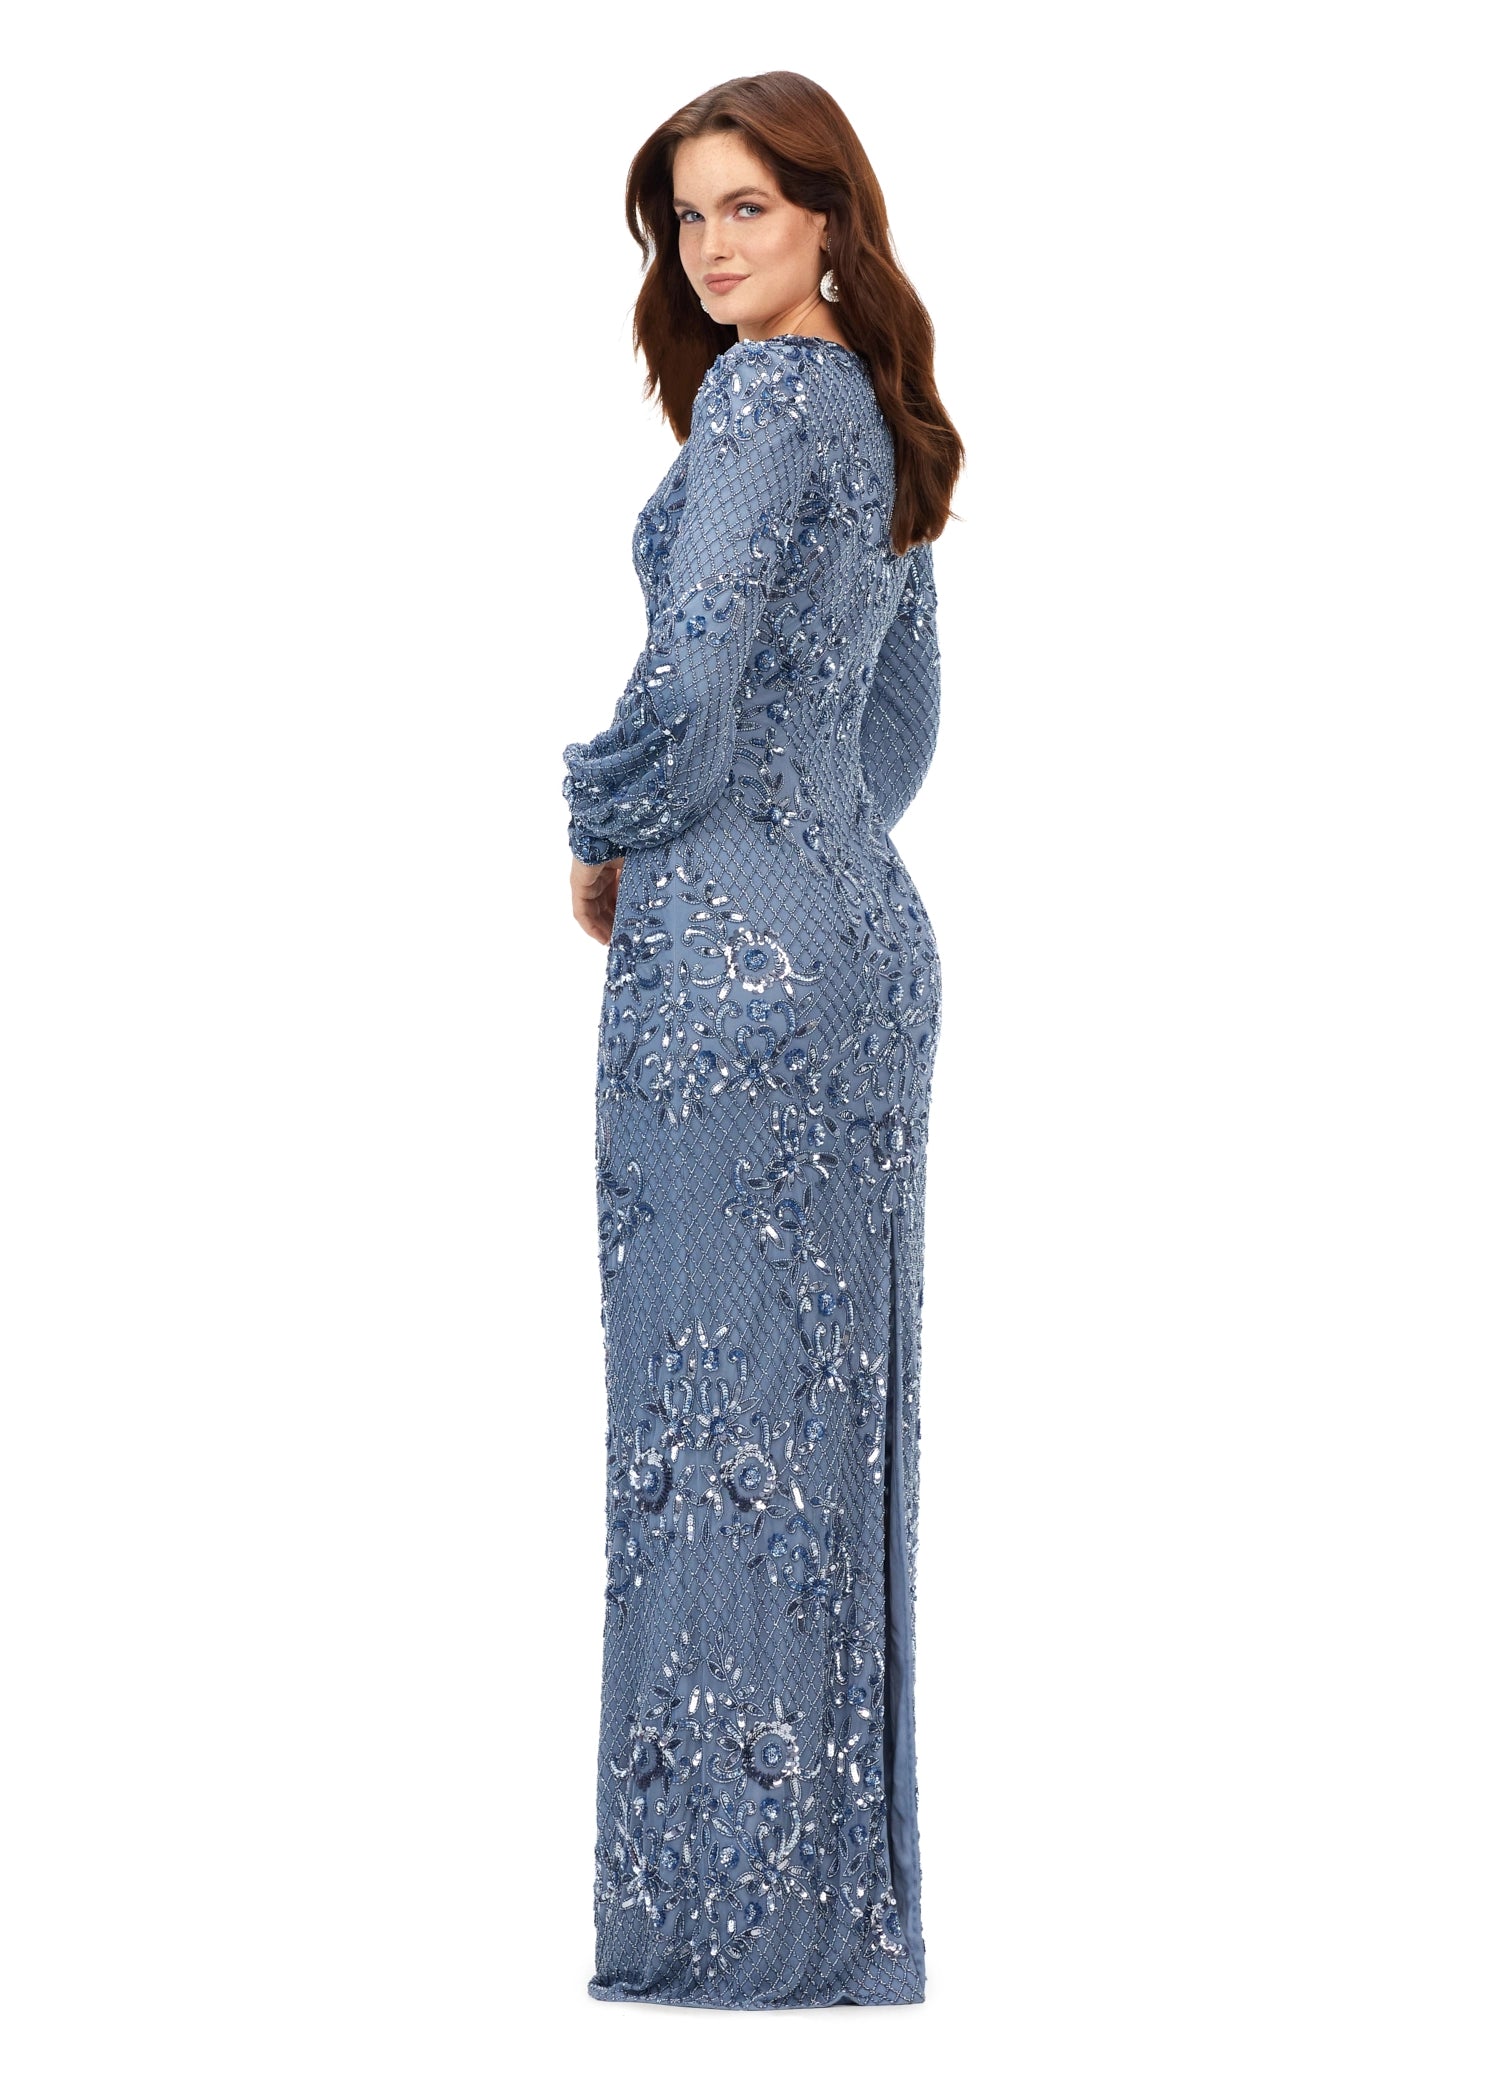 Ashley Lauren 11193 Beaded V-Neck Gown With Bishop Sleeves Fully Sequin Formal Dress. This ultra chic v-neck gown features an ornate bead pattern throughout, and carries onto the bishop sleeves. The full zipper high back, and center back vent completes the look.